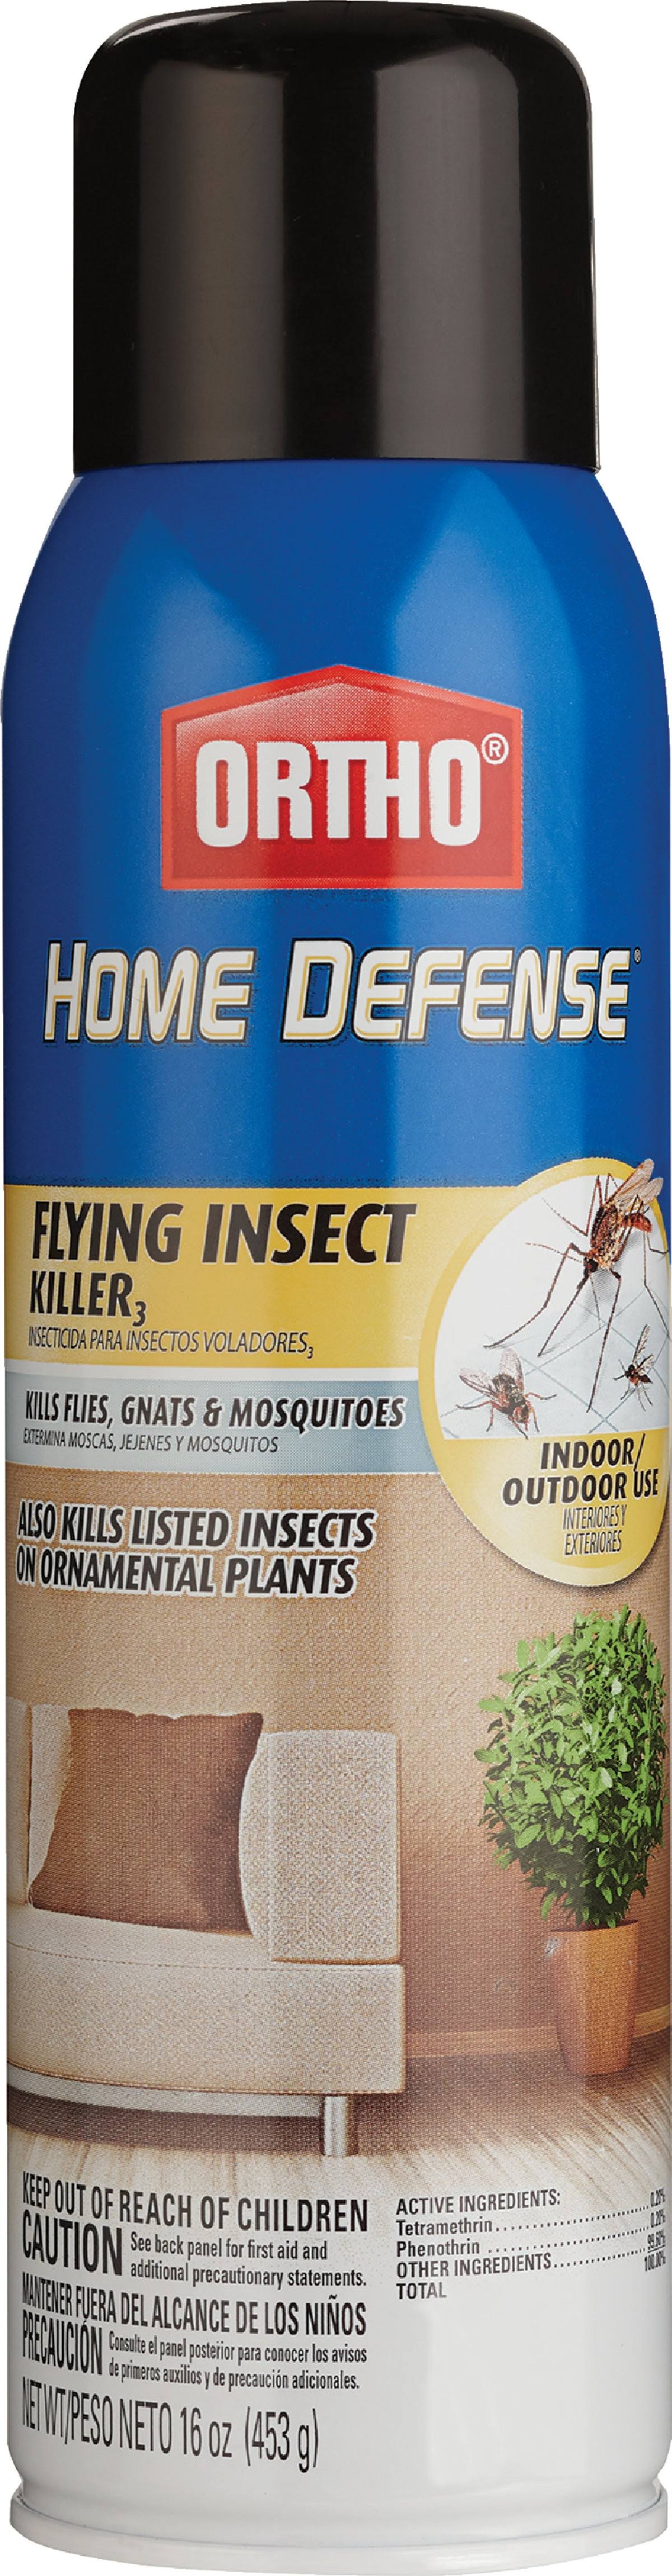 Ortho Home Defense Flying Insect Killer Liquid Spray Application Indoor Outdoor 16 oz Bottle 0112812